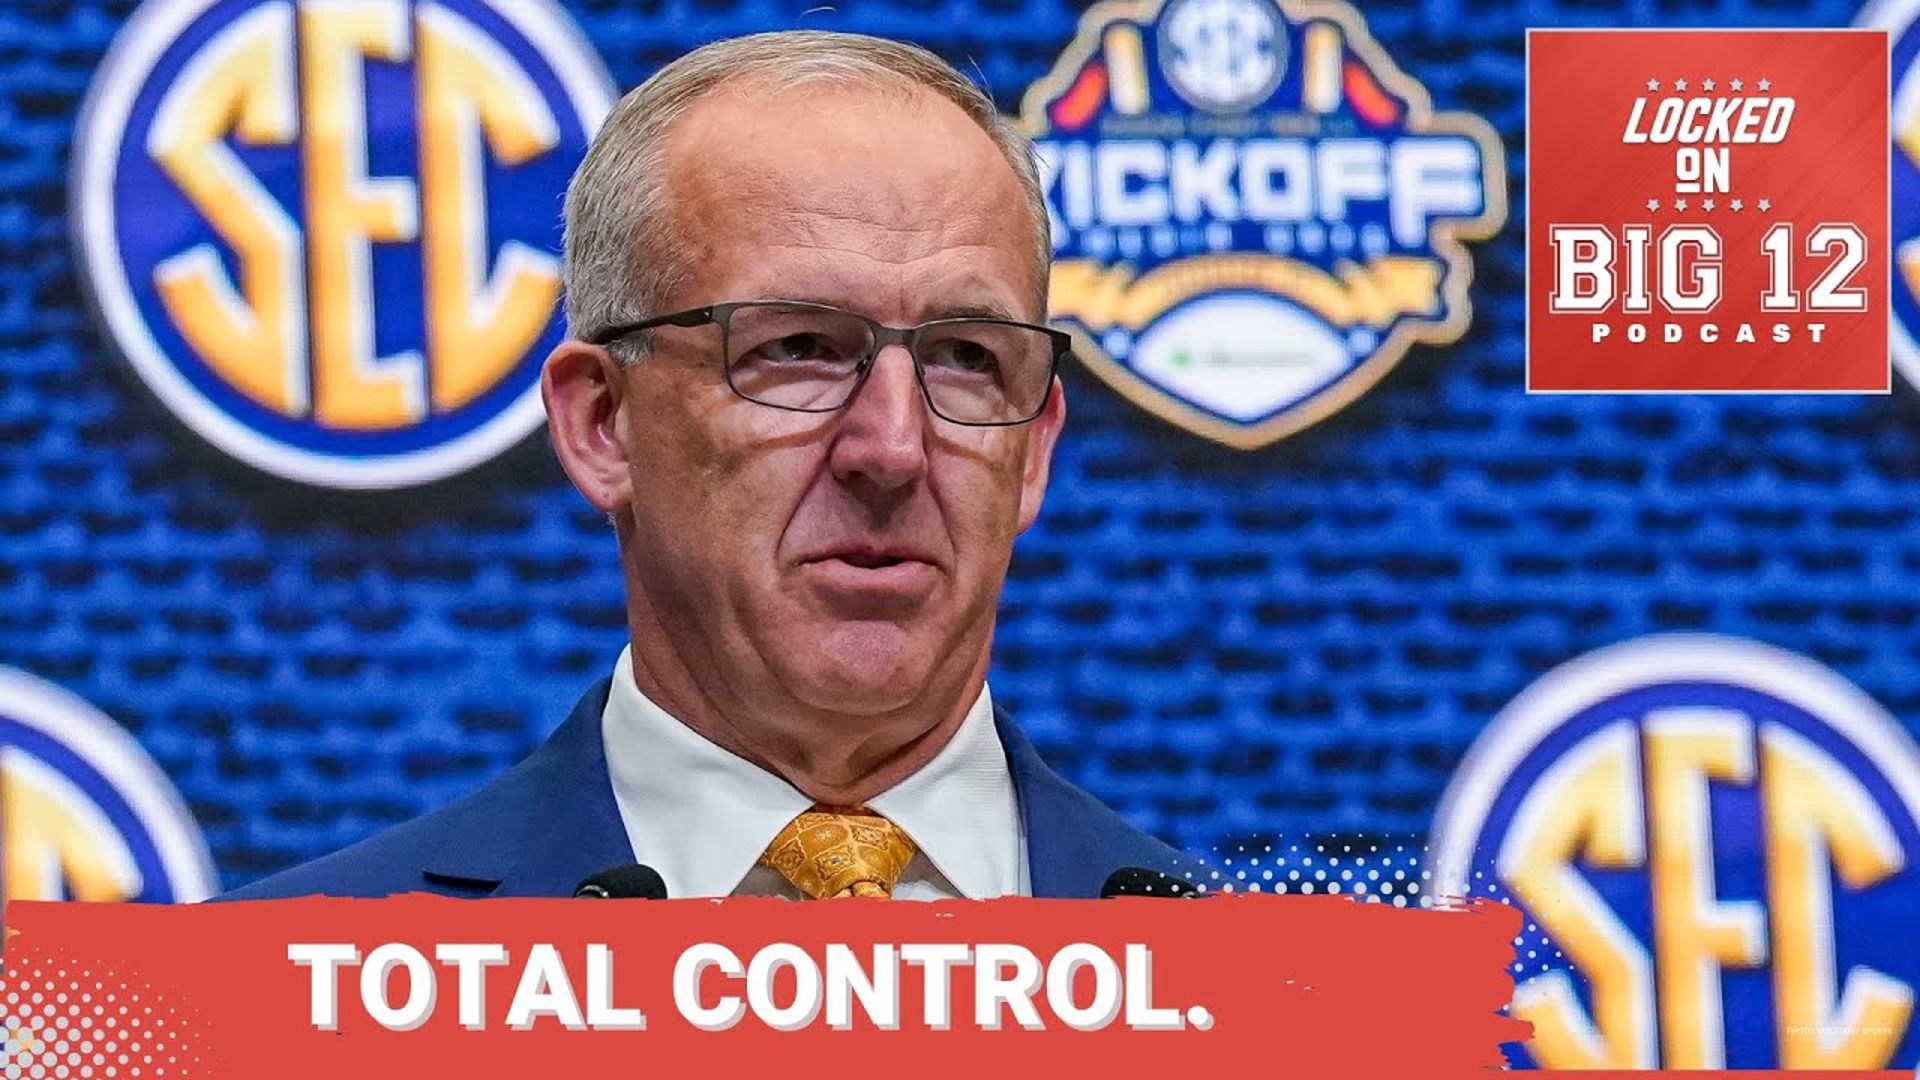 The Southeastern Conference (SEC) and the Big Ten Conference exert significant control over college football from a media & TV standpoint due to several key factors